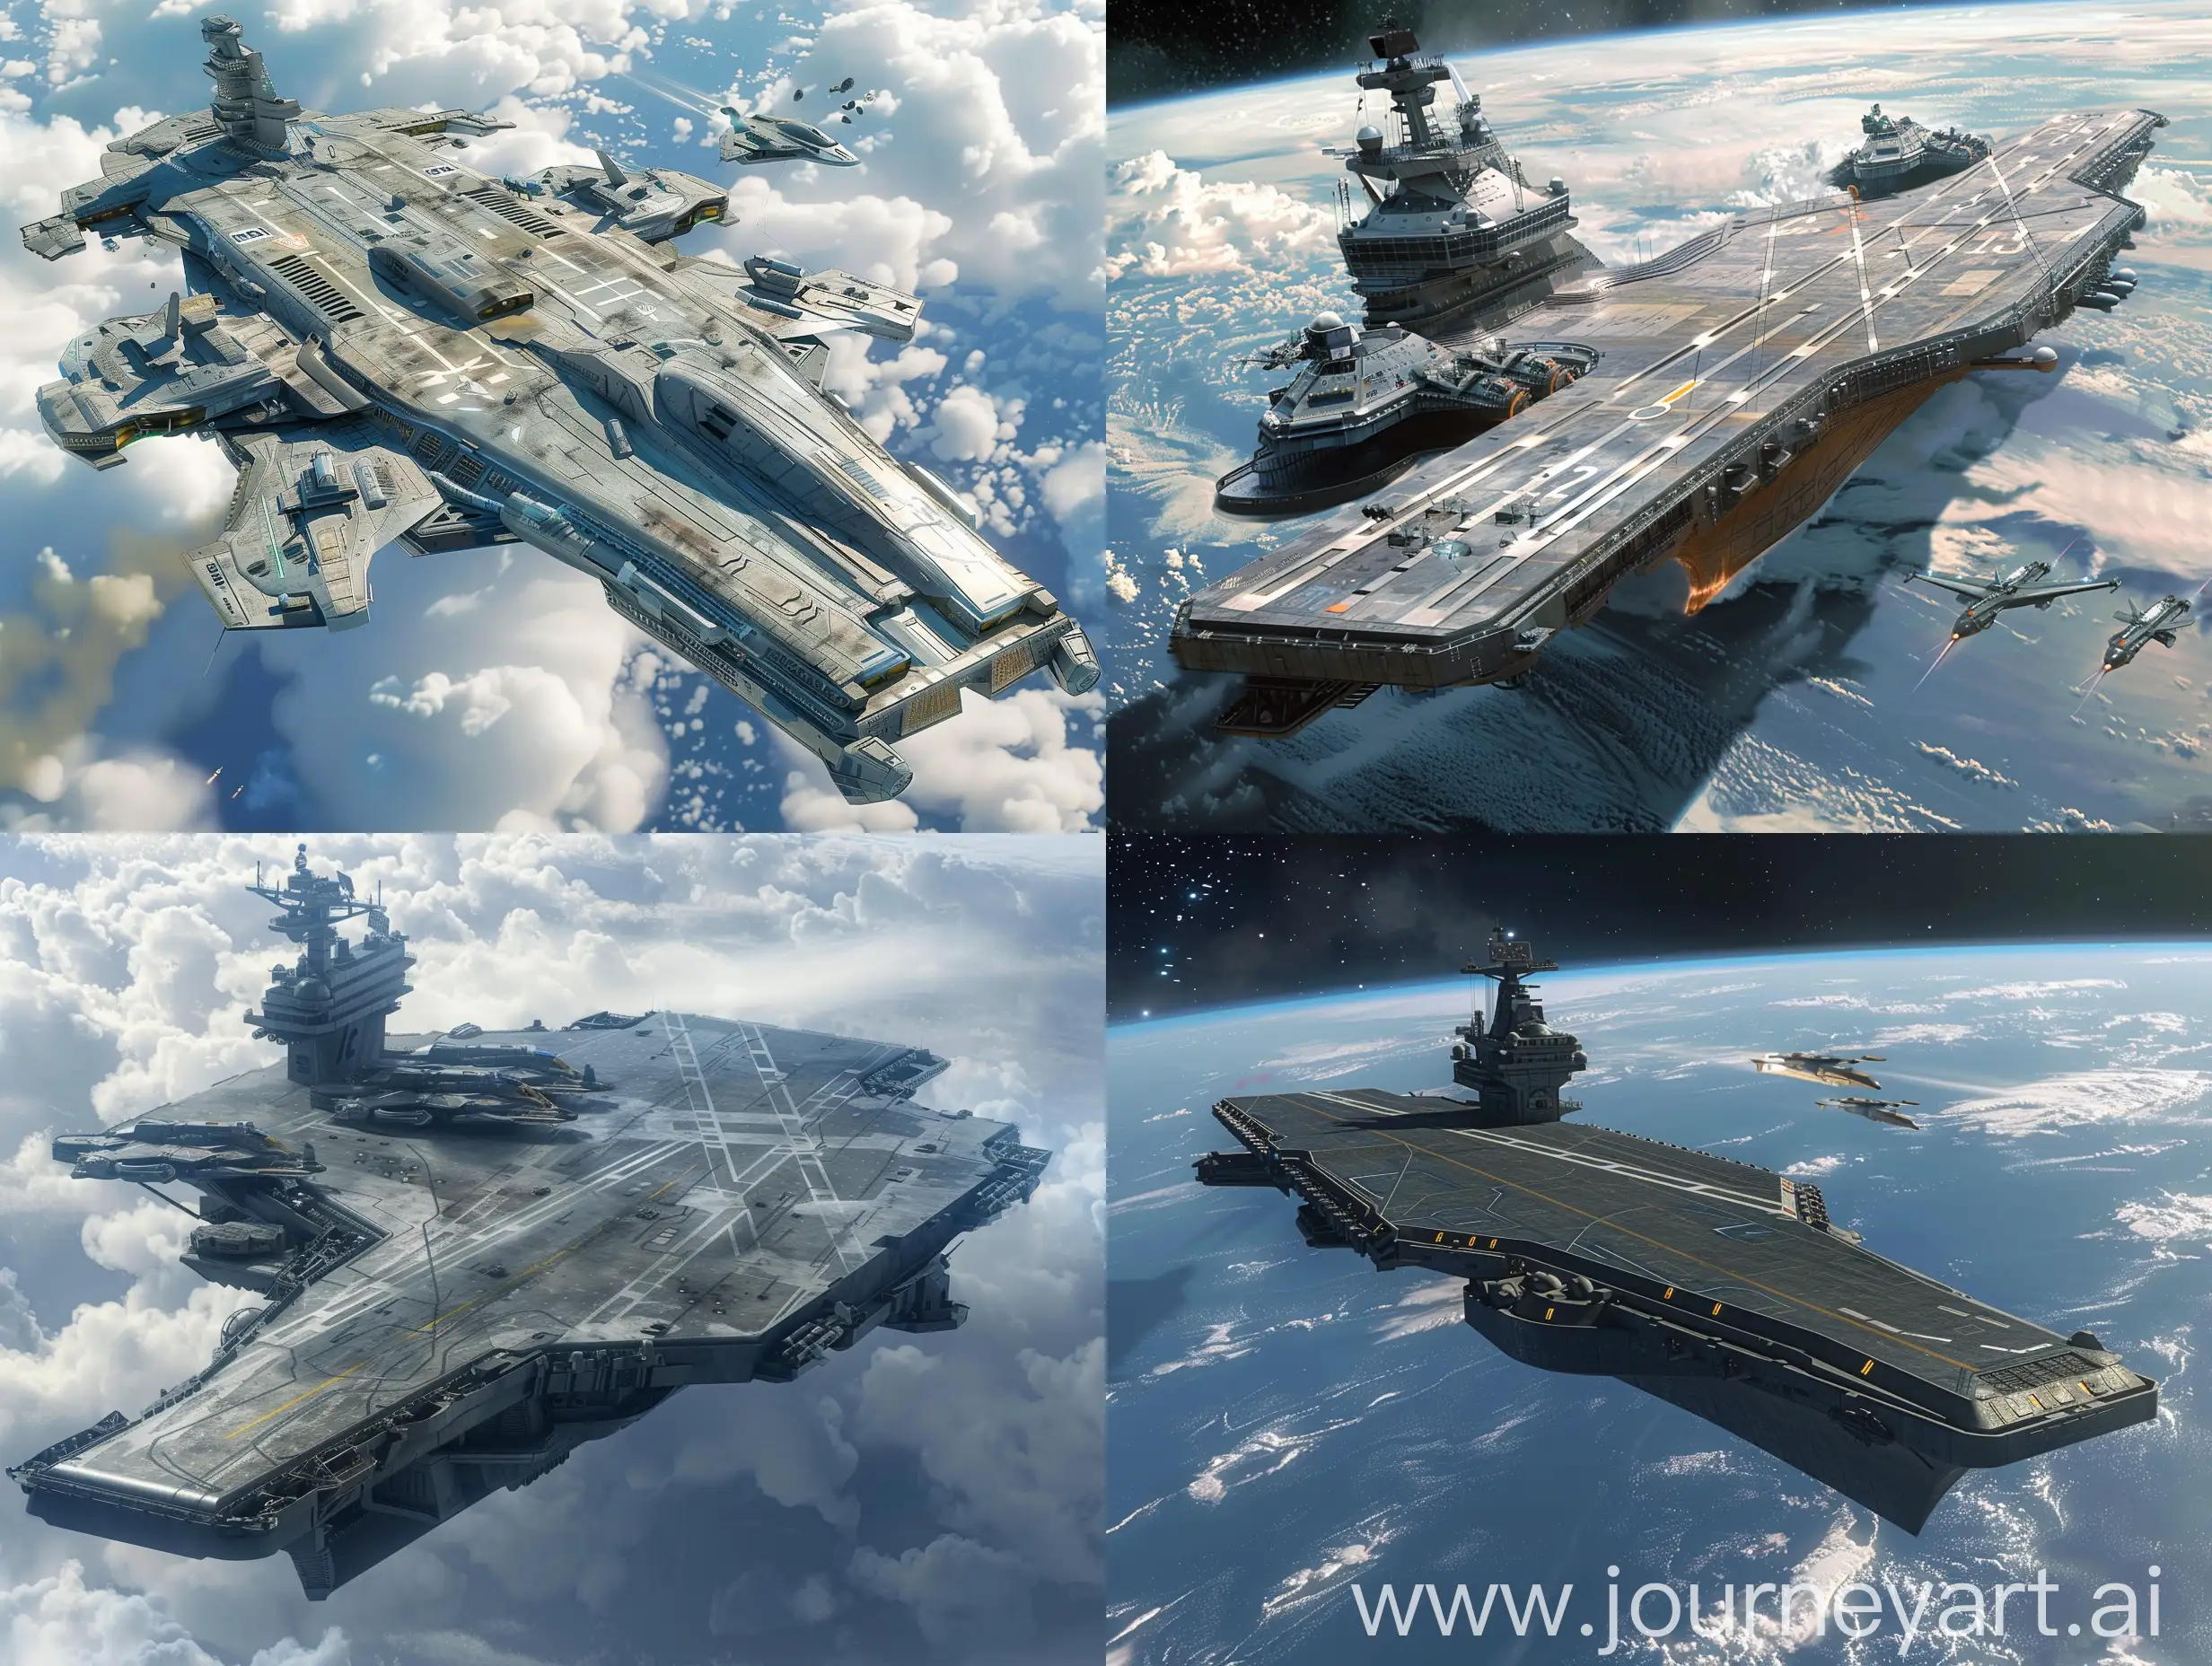 A SCI FI Super Carrier under a military called the United Earthern Military. Specifically Under a branch called the United Eathern Navy. Revolving around Space and Space warfare with a flight of two space craft on a Combat Air Patrol.